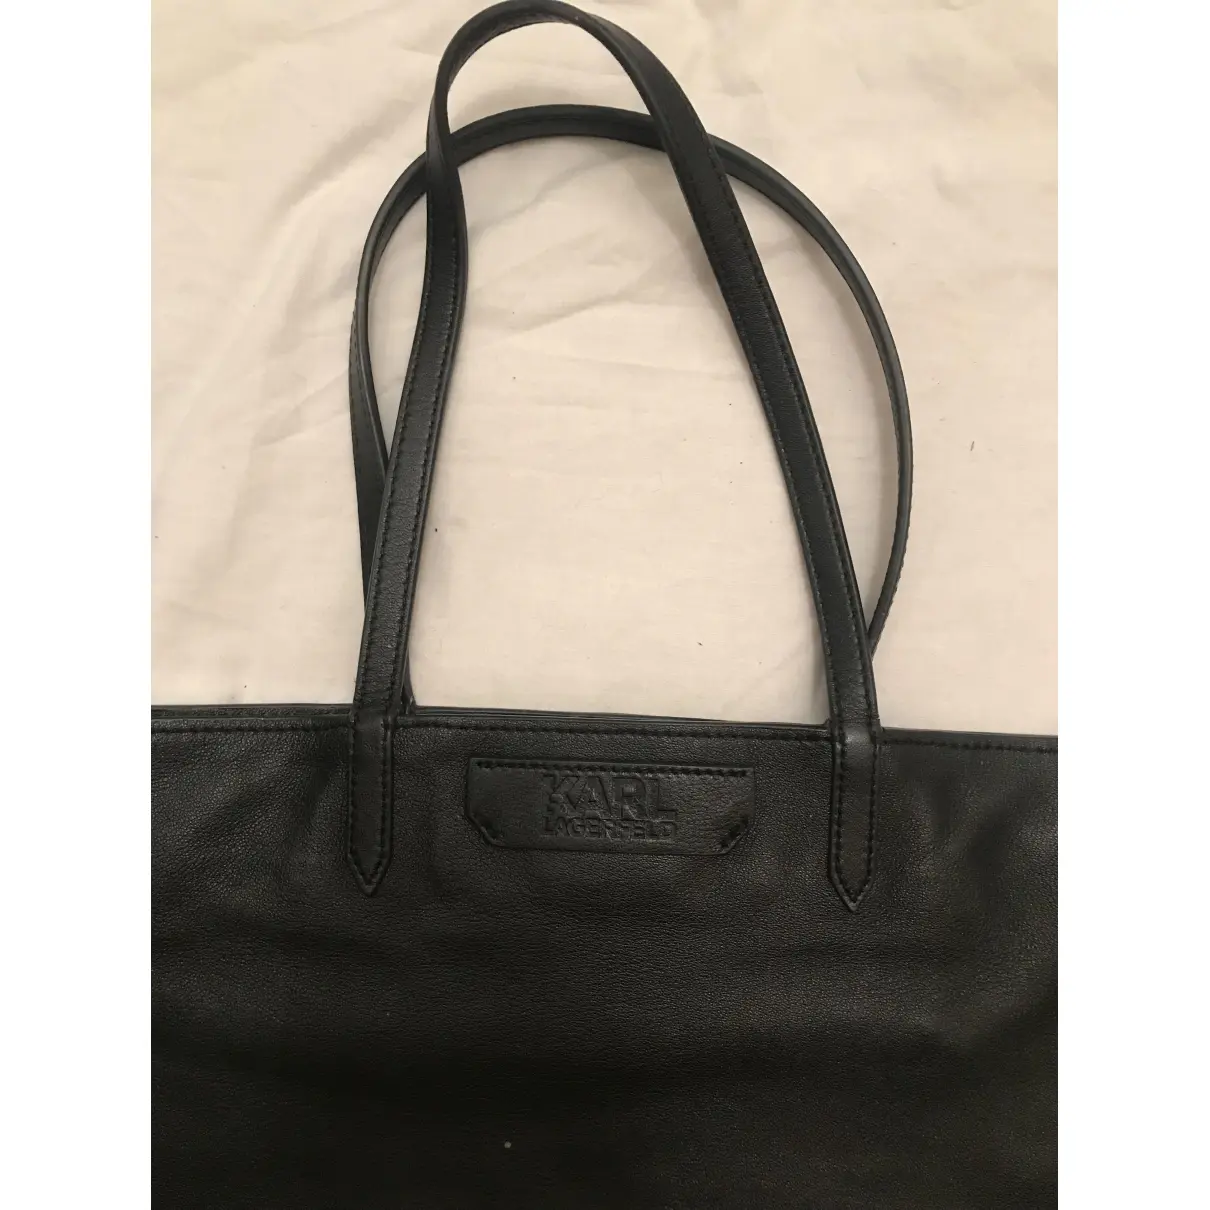 Karl Lagerfeld Leather tote for sale